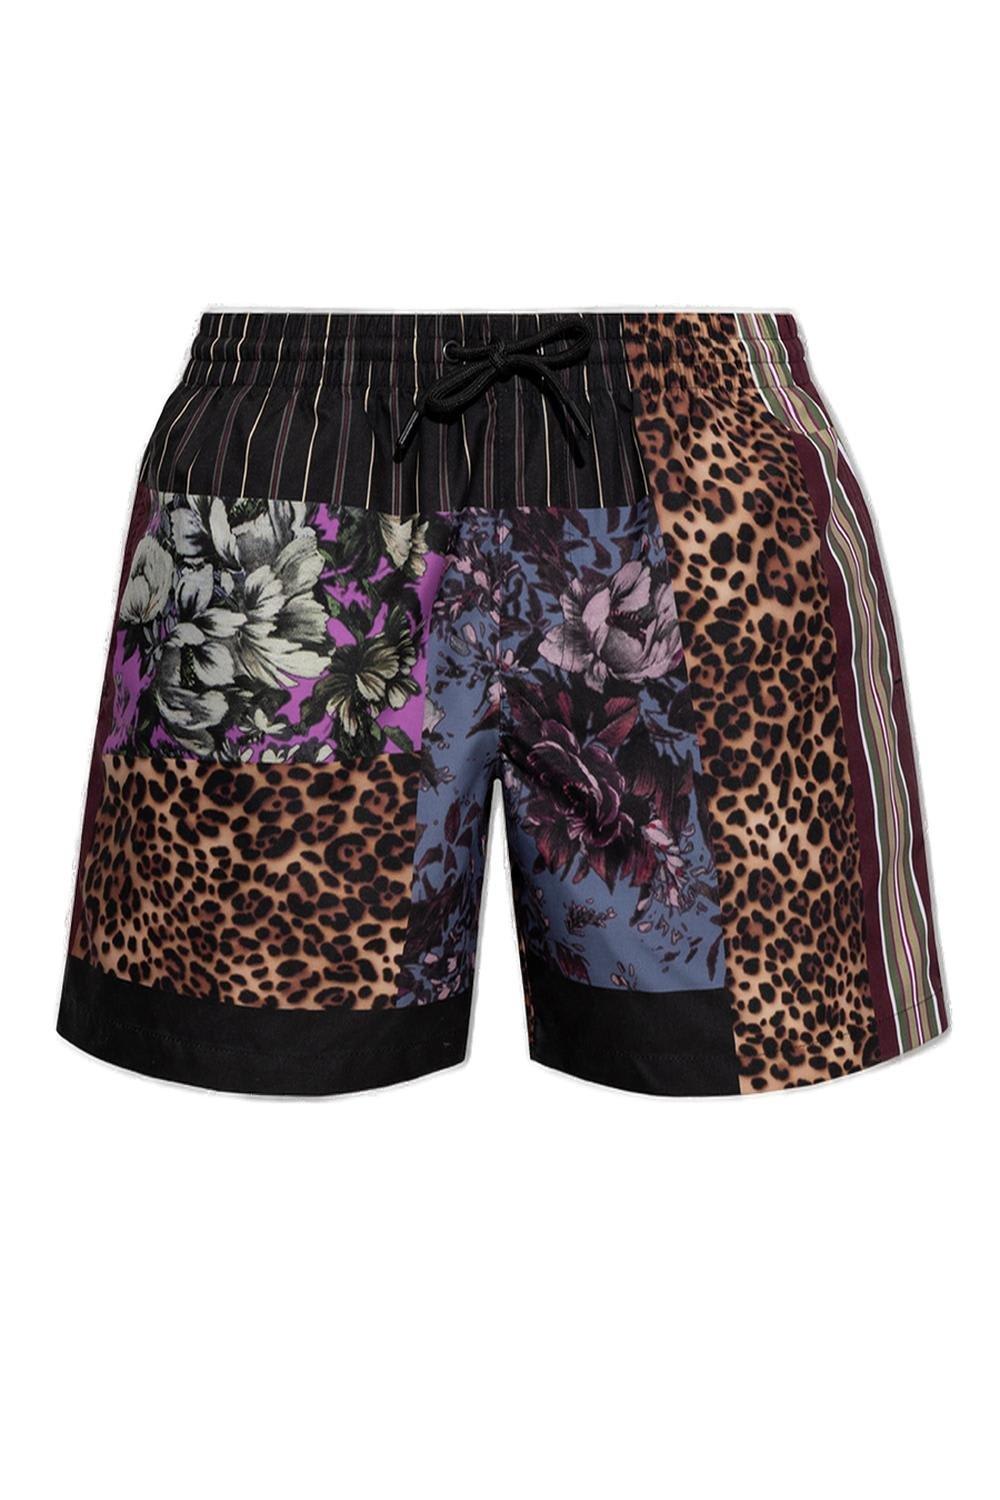 DRIES VAN NOTEN ALL-OVER GRAPHIC PRINTED SWIMMING SHORTS